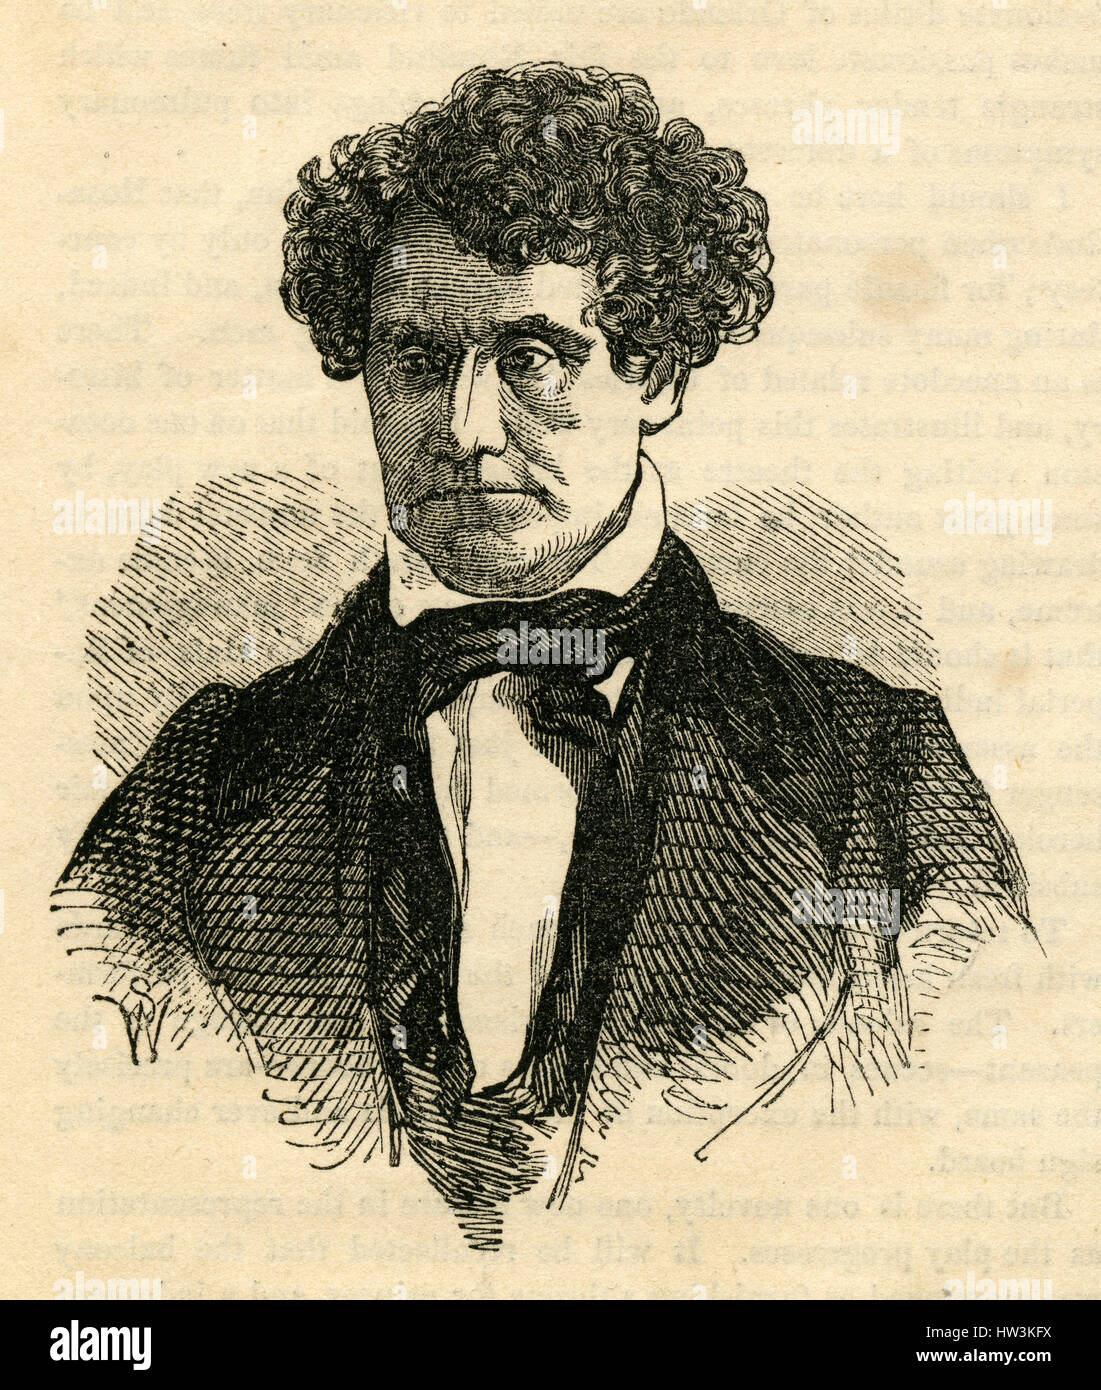 Antique 1854 engraving, 'The Late Thomas S. Hamblin.' Thomas Sowerby Hamblin (14 May 1800 – 8 January 1853) was an English actor and theatre manager. SOURCE: ORIGINAL ENGRAVING. Stock Photo